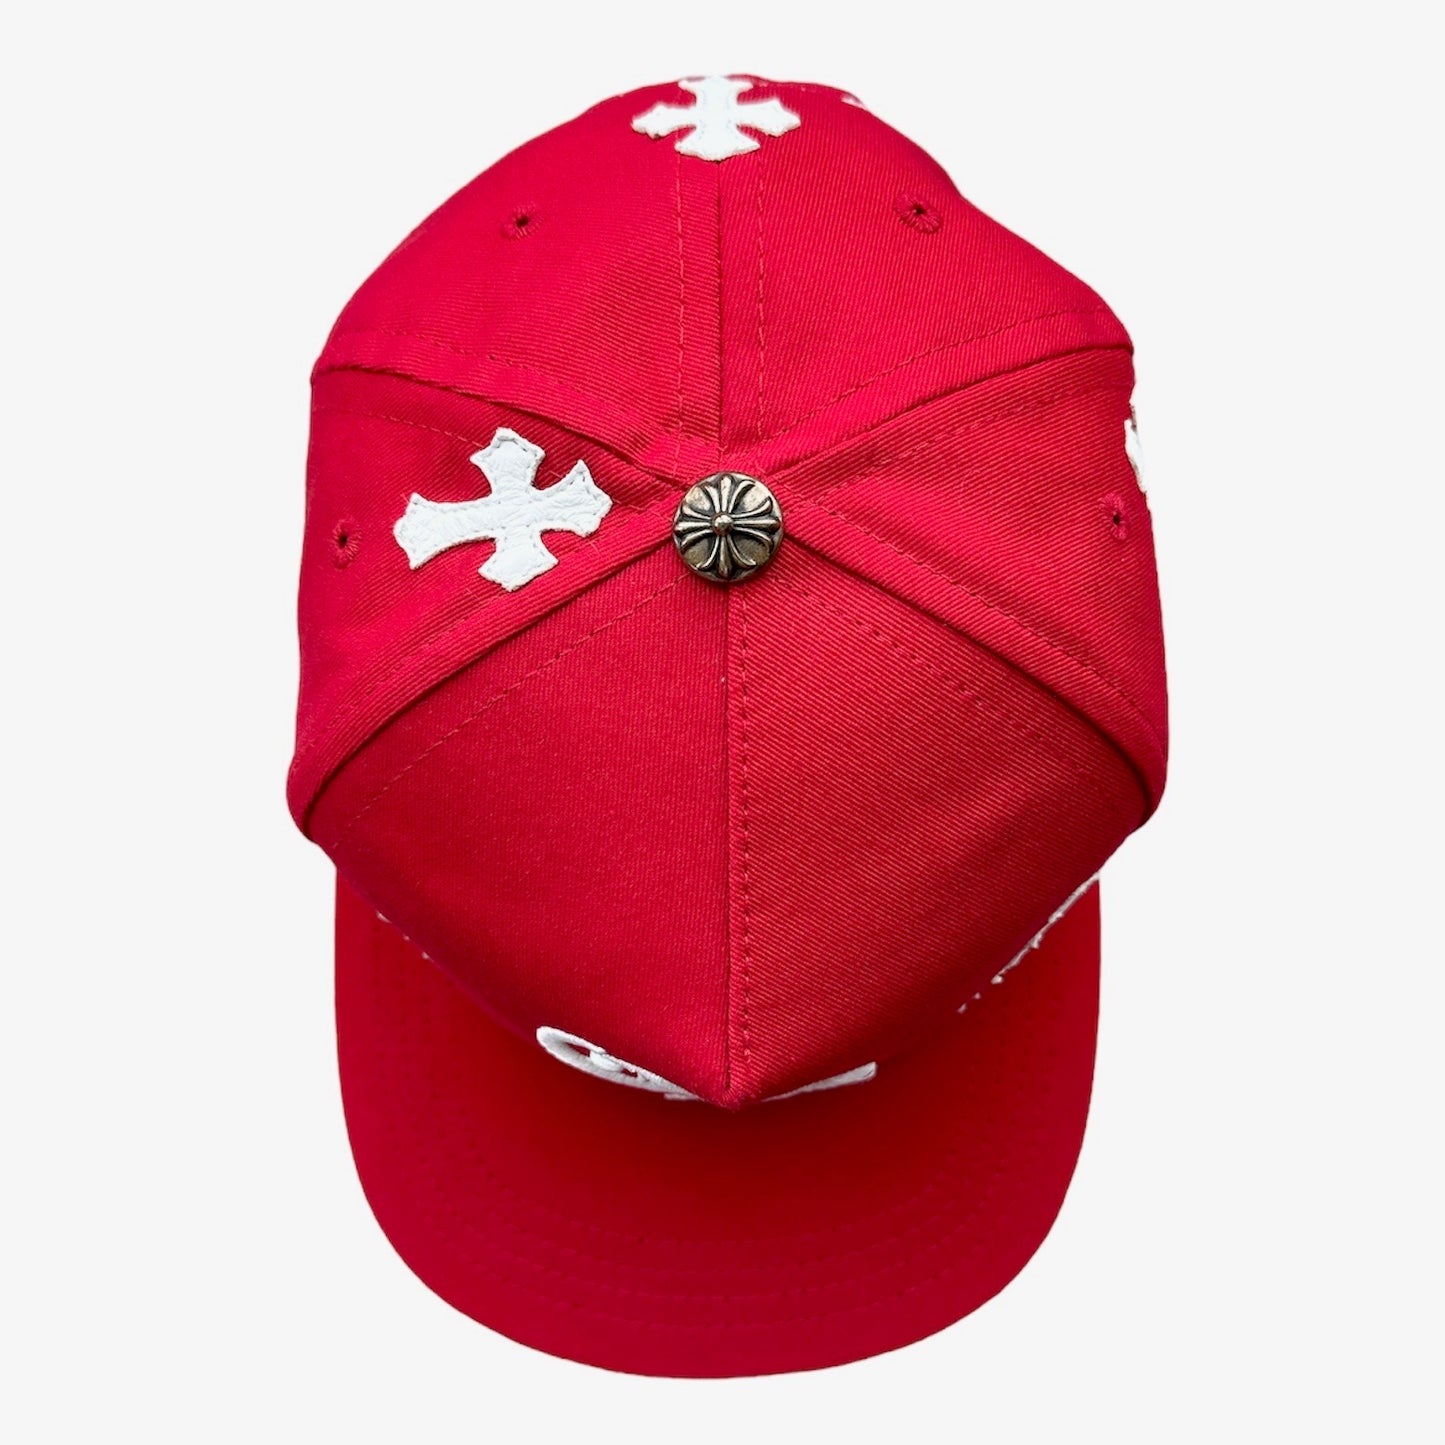 Chrome Hearts Cross Patch Red CH Baseball Hat